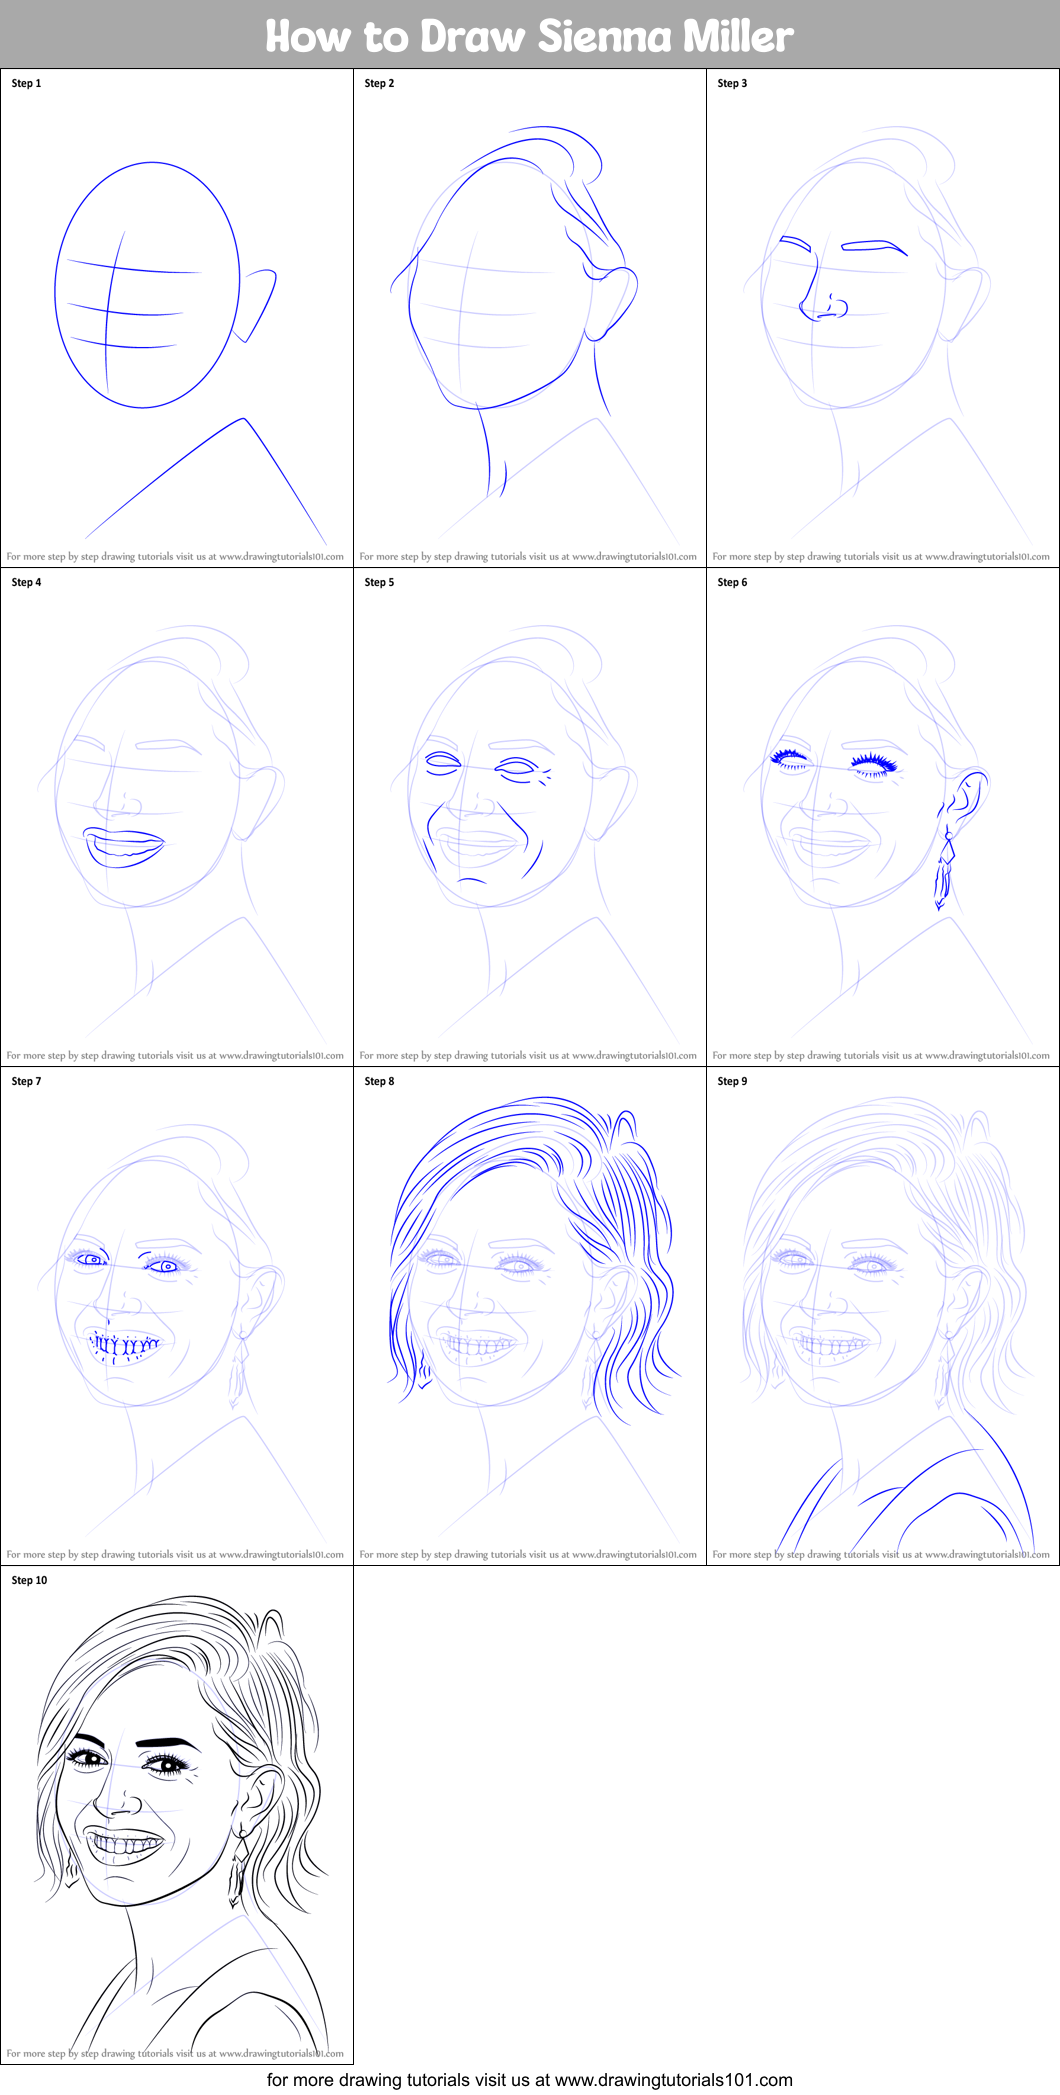 How to Draw Sienna Miller printable step by step drawing sheet